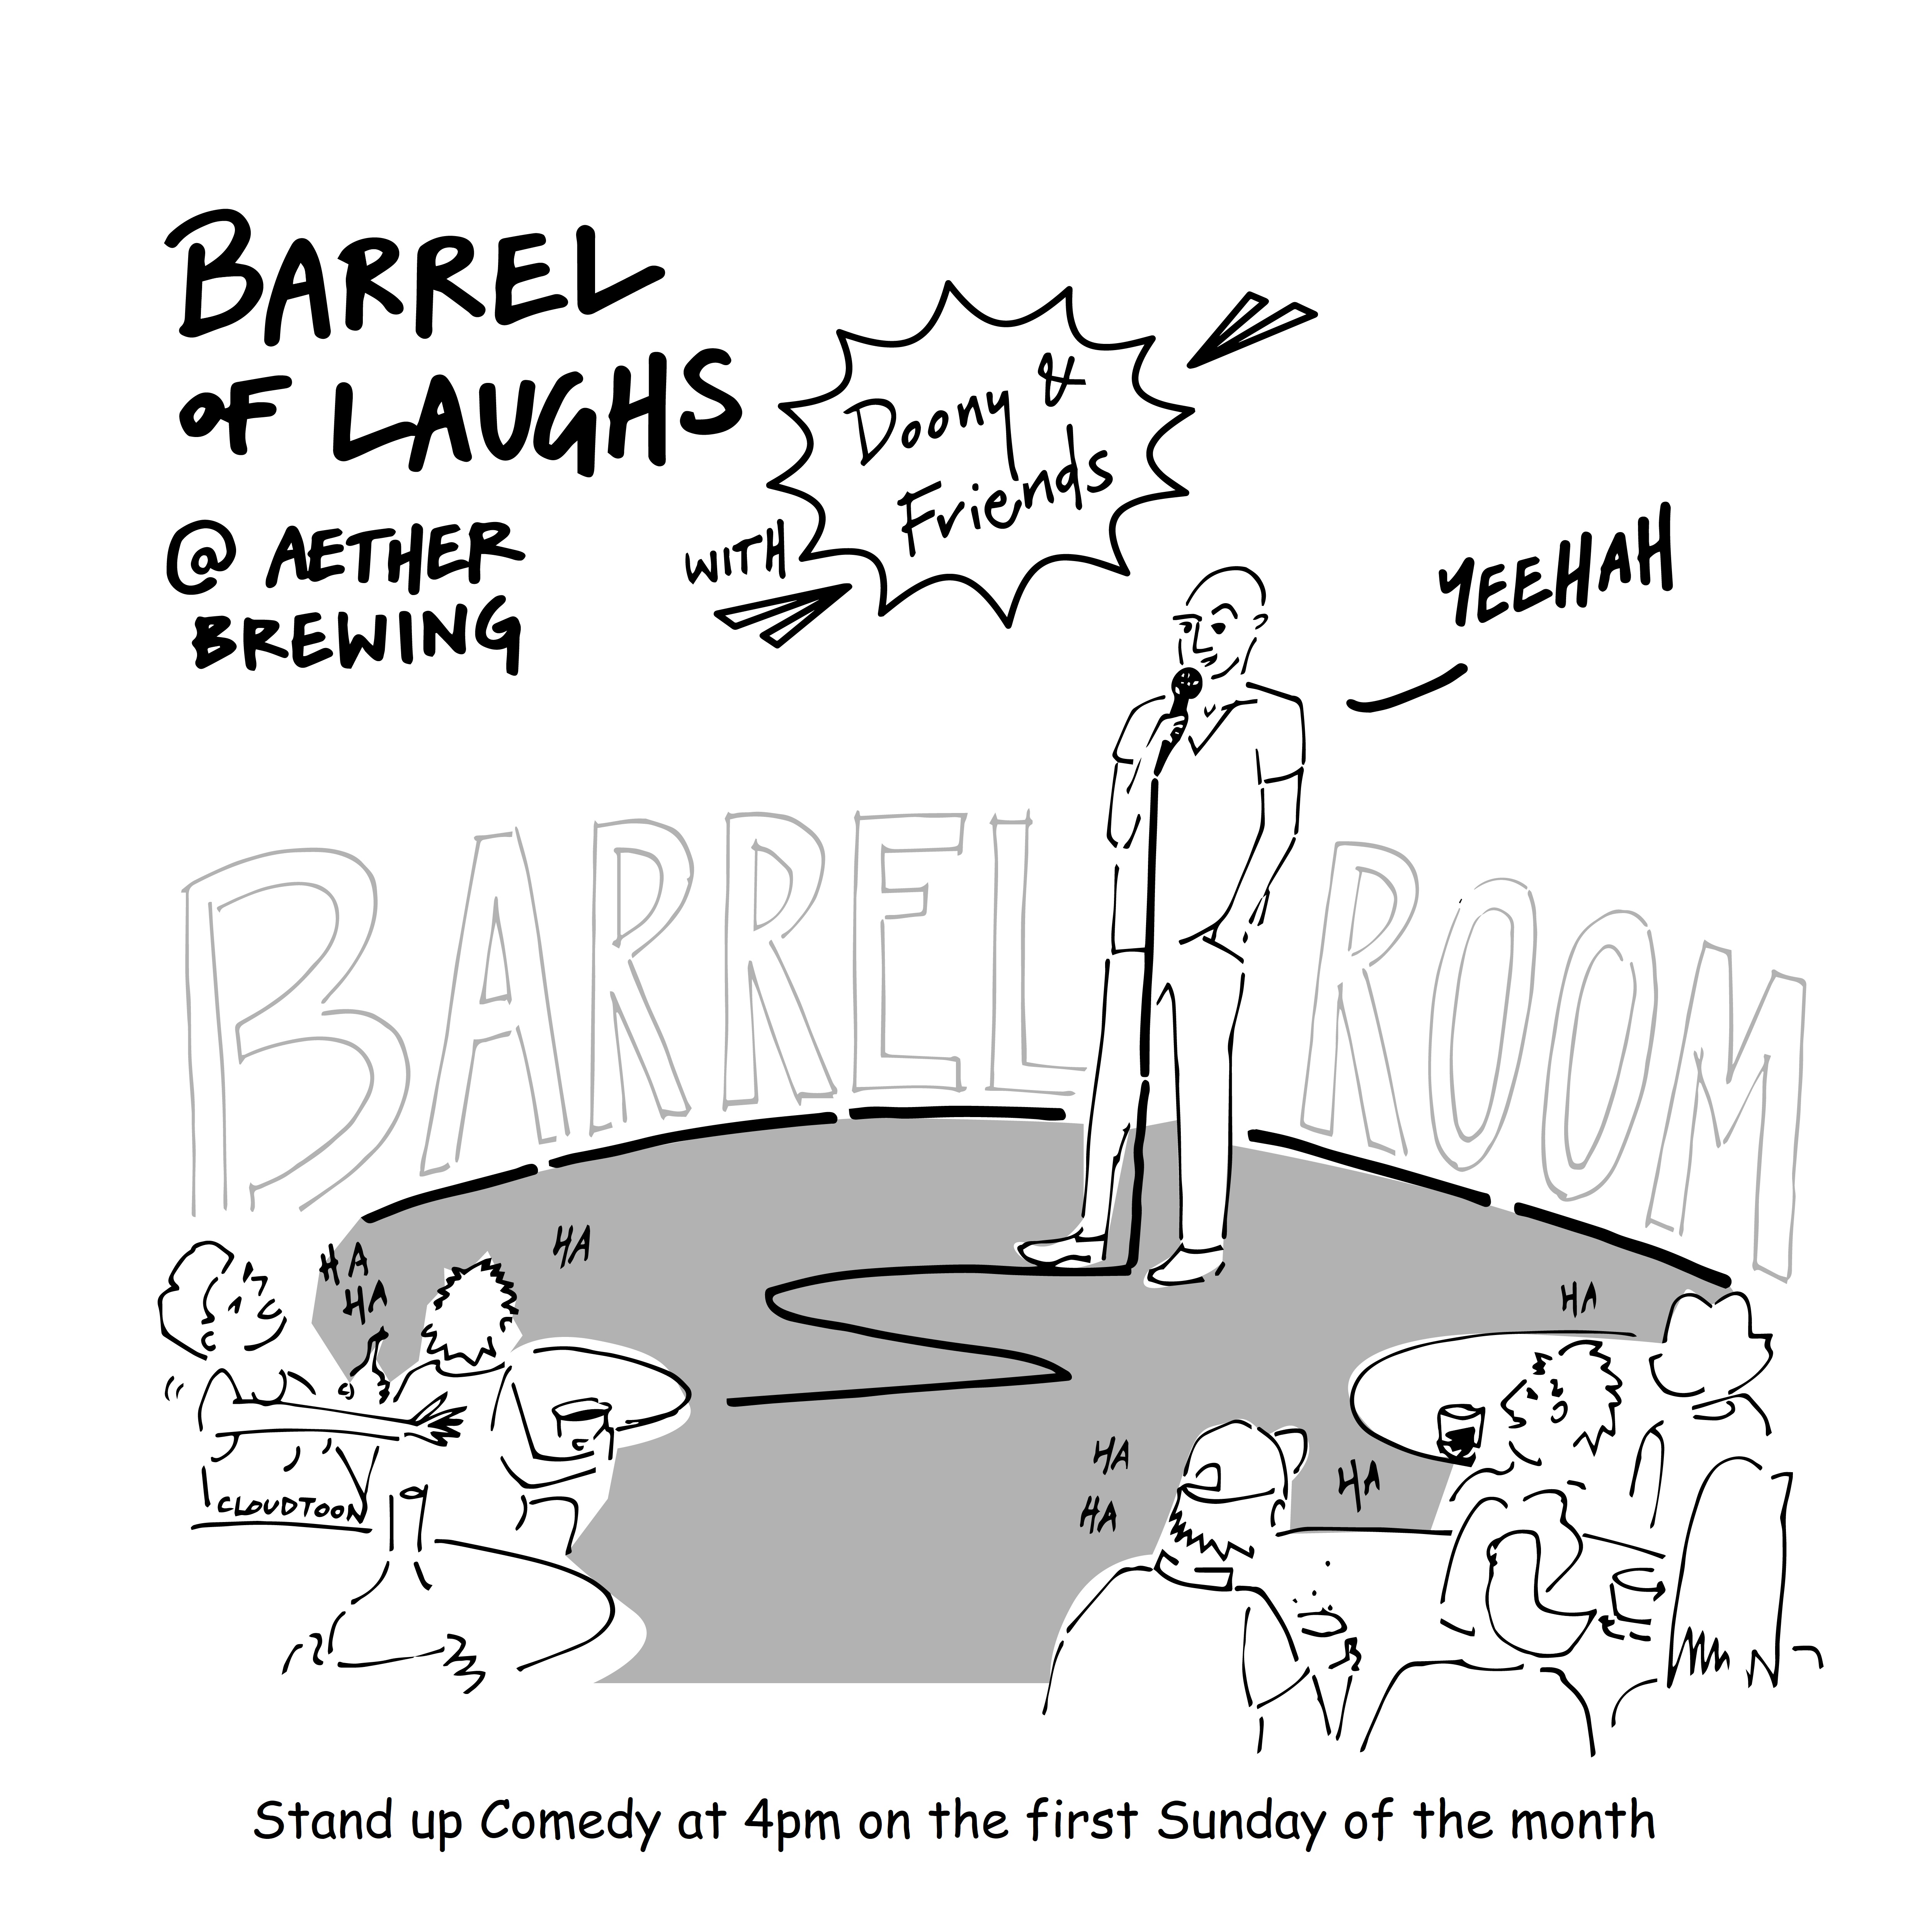 Barrel of Laughs, performed by Doony & Friends